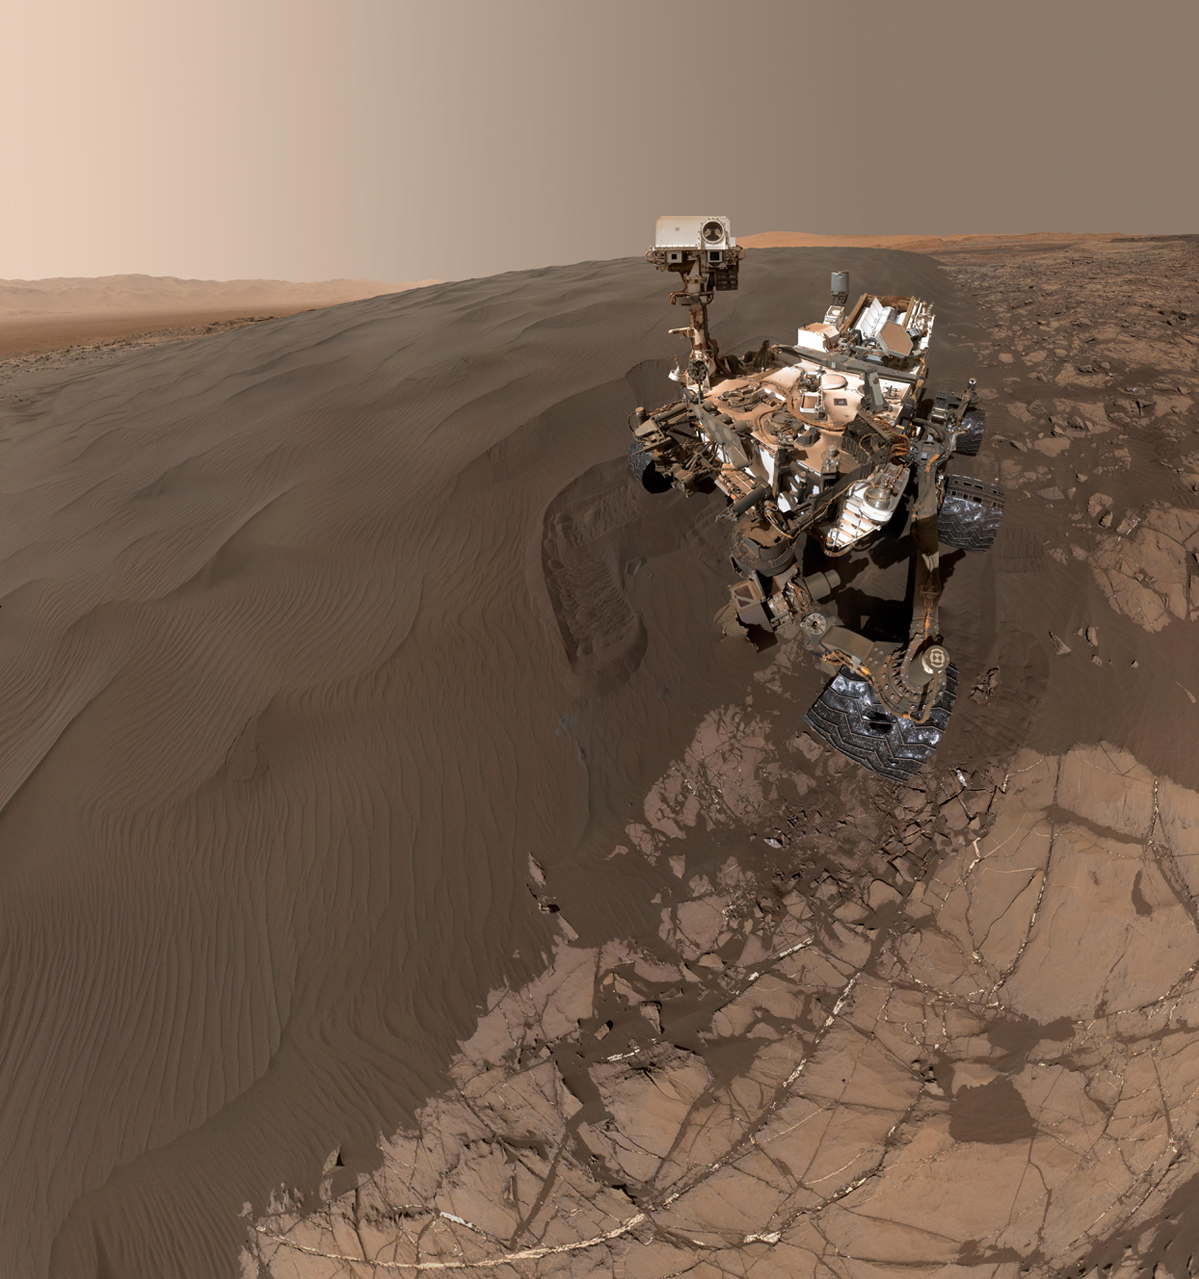 Curiosity Rover on Mars Snaps Epic Selfie with Sand Dunes (Photo)